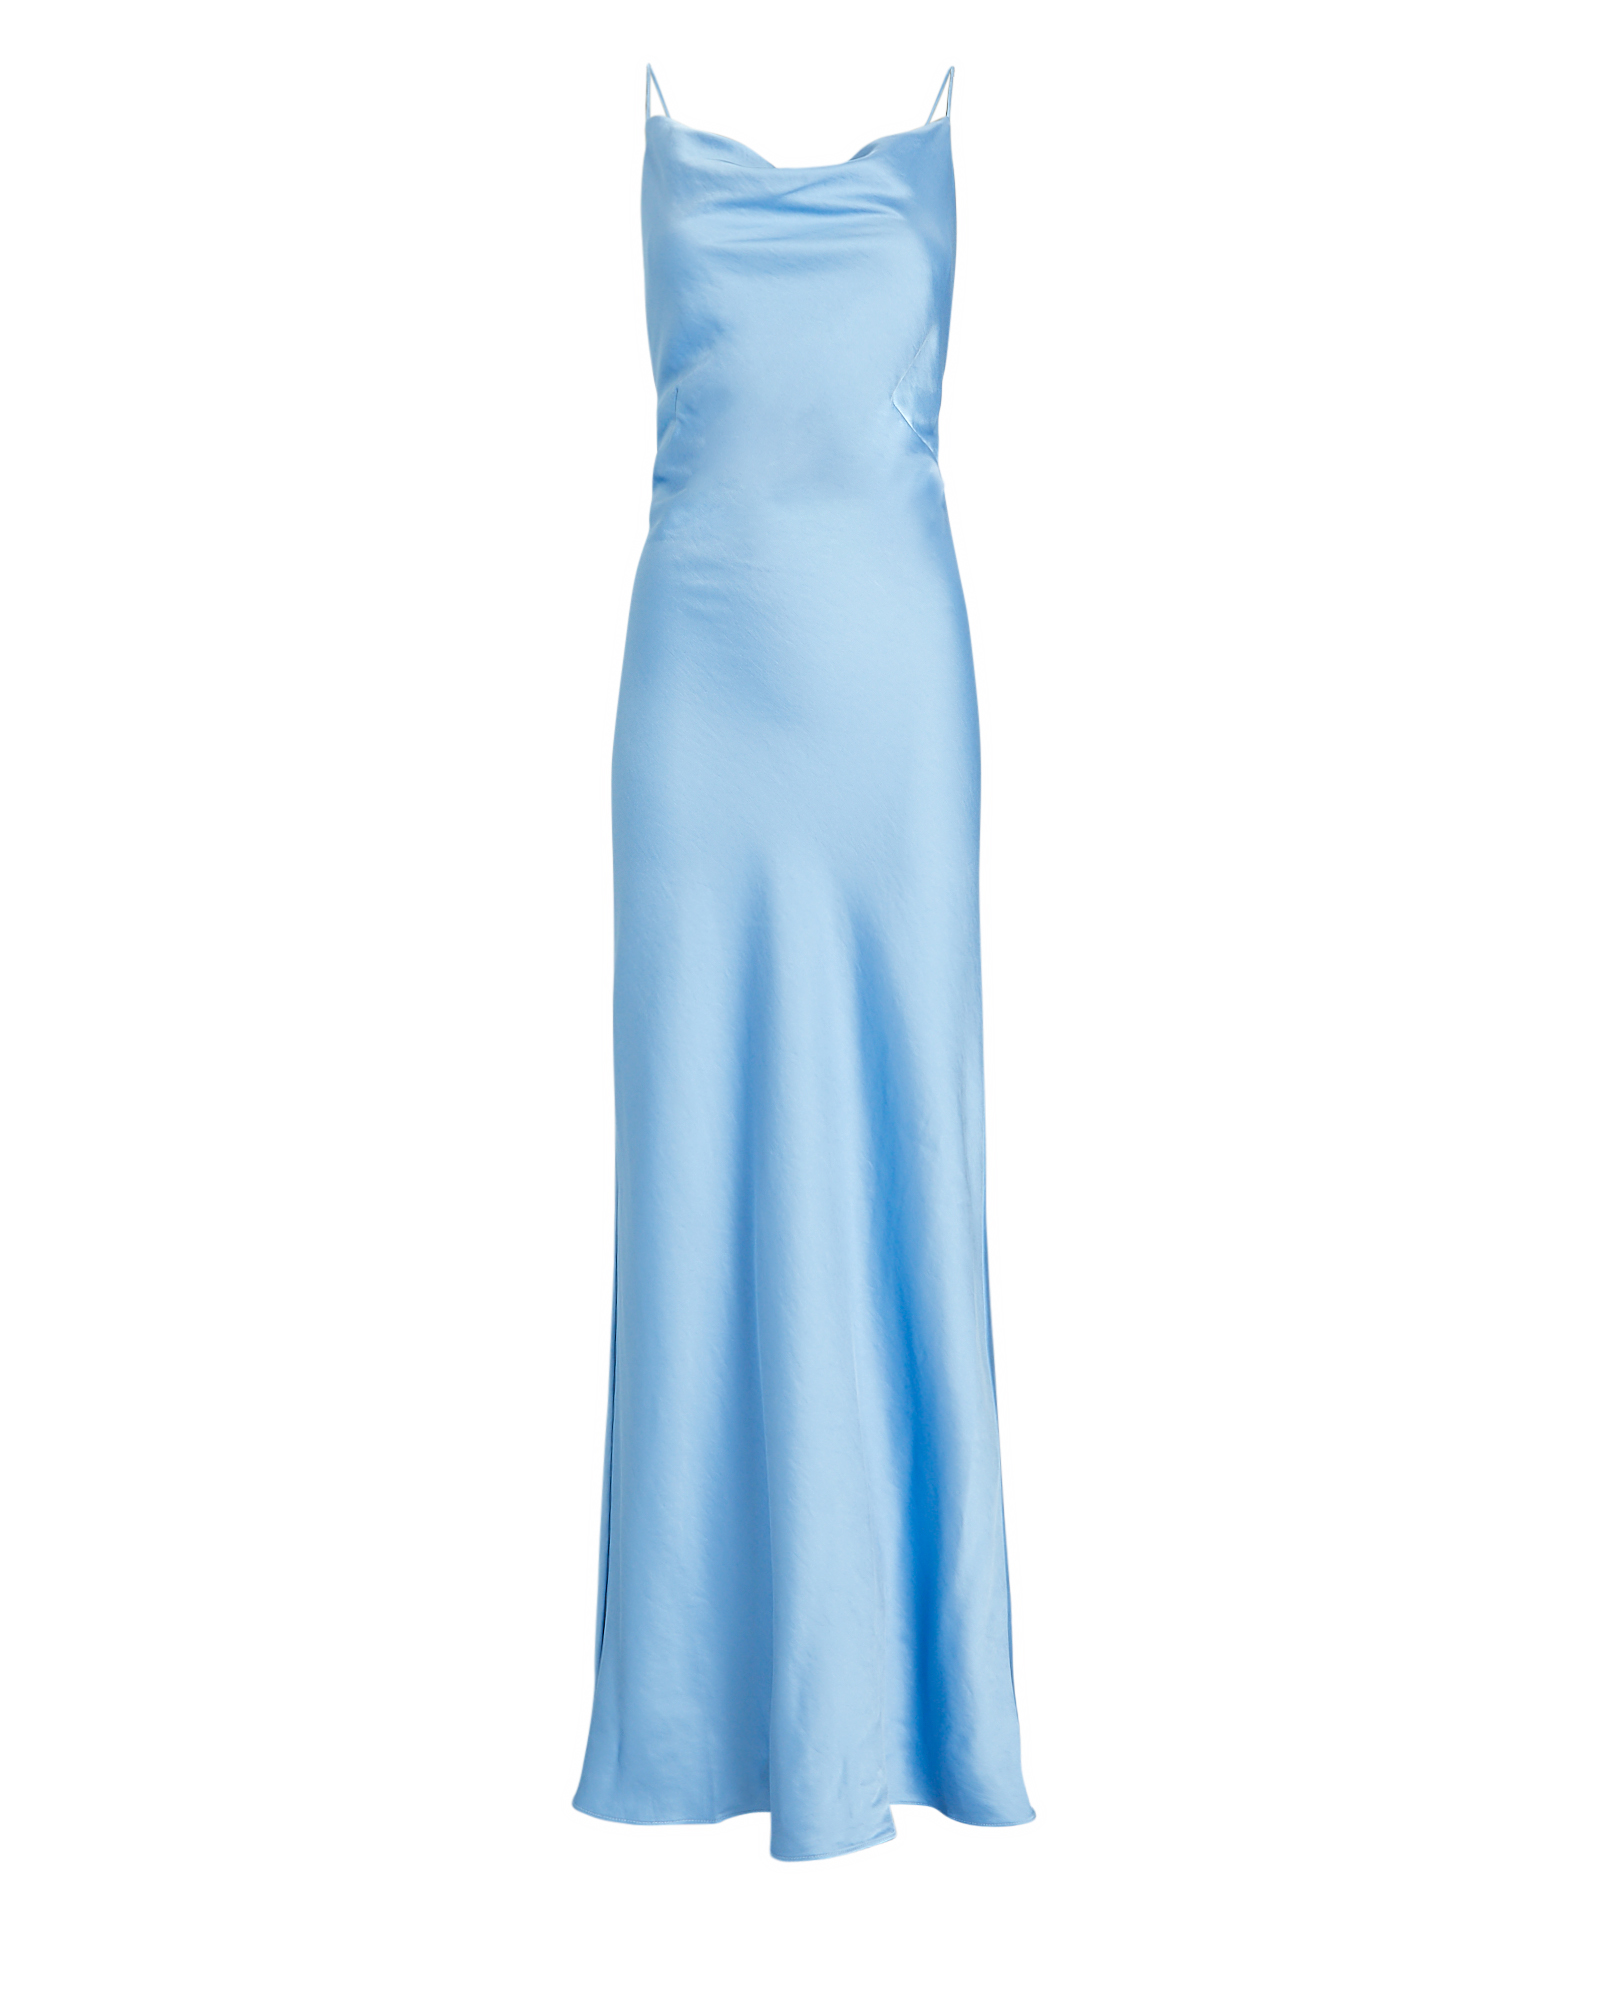 Significant Other Aila Tie-Back Satin Maxi Dress | INTERMIX®